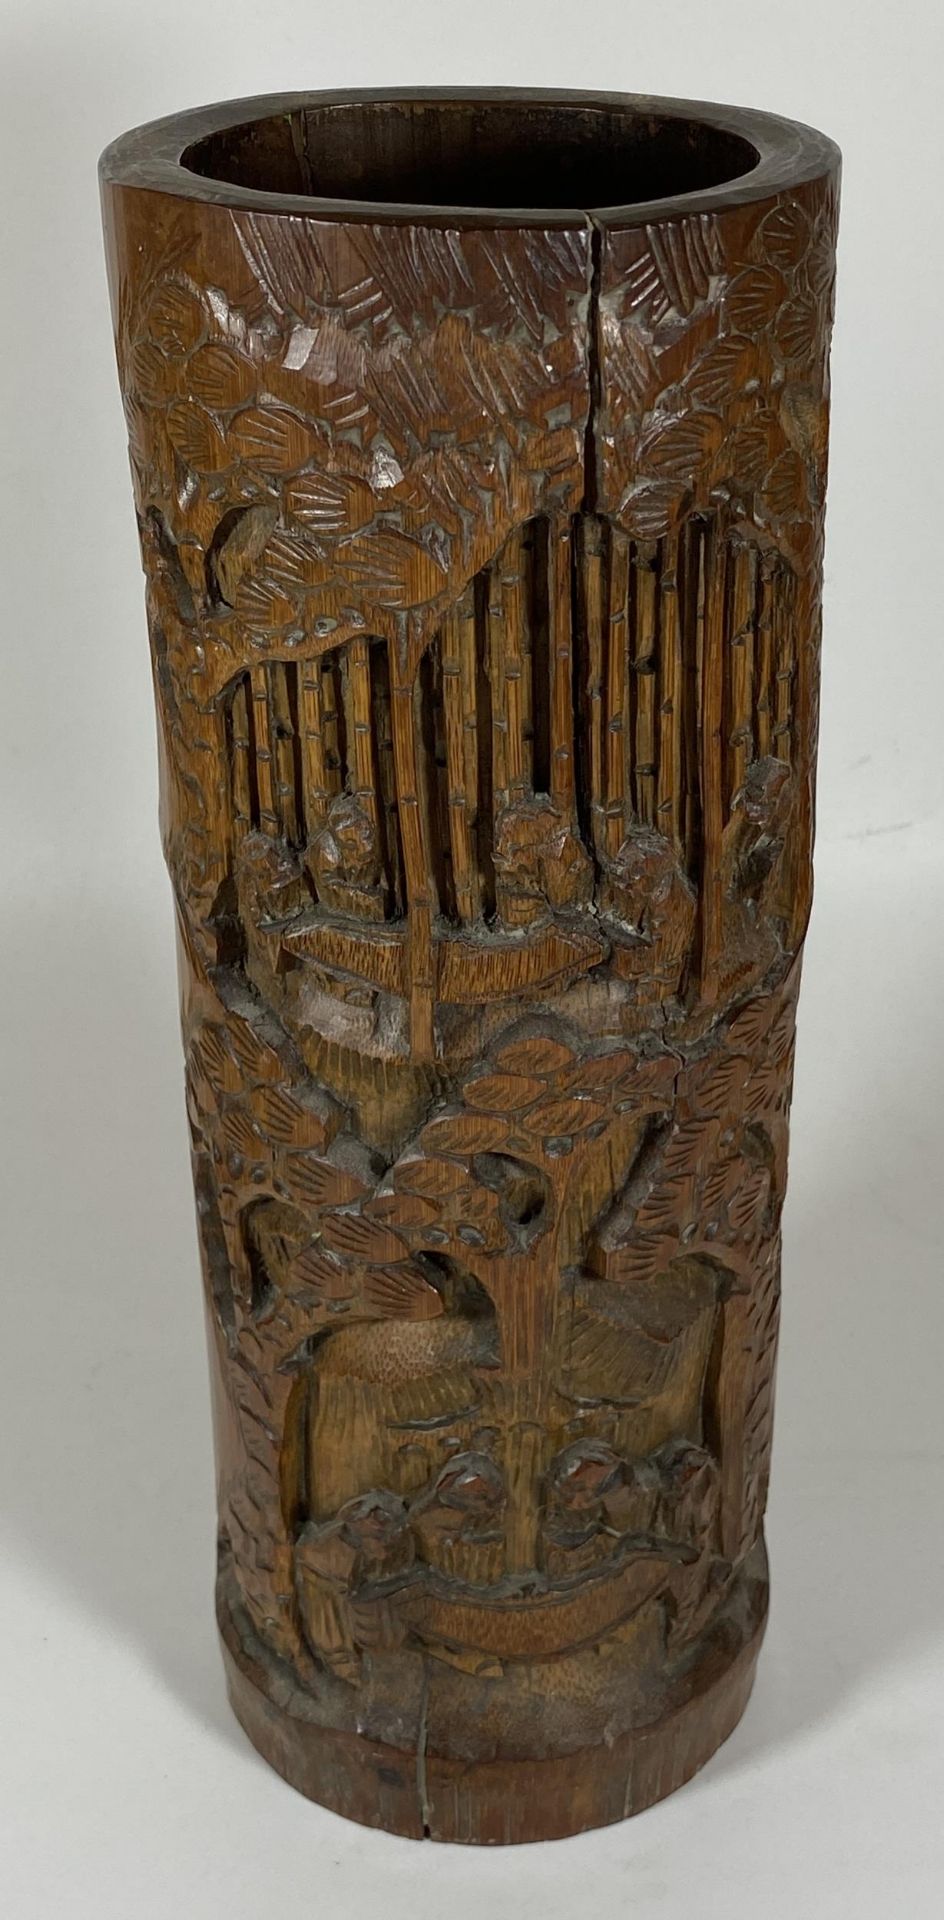 A LATE 19TH / EARLY 20TH CENTURY CHINESE CARVED BAMBOO BRUSH POT / SLEEVE VASE, HEIGHT 31CM